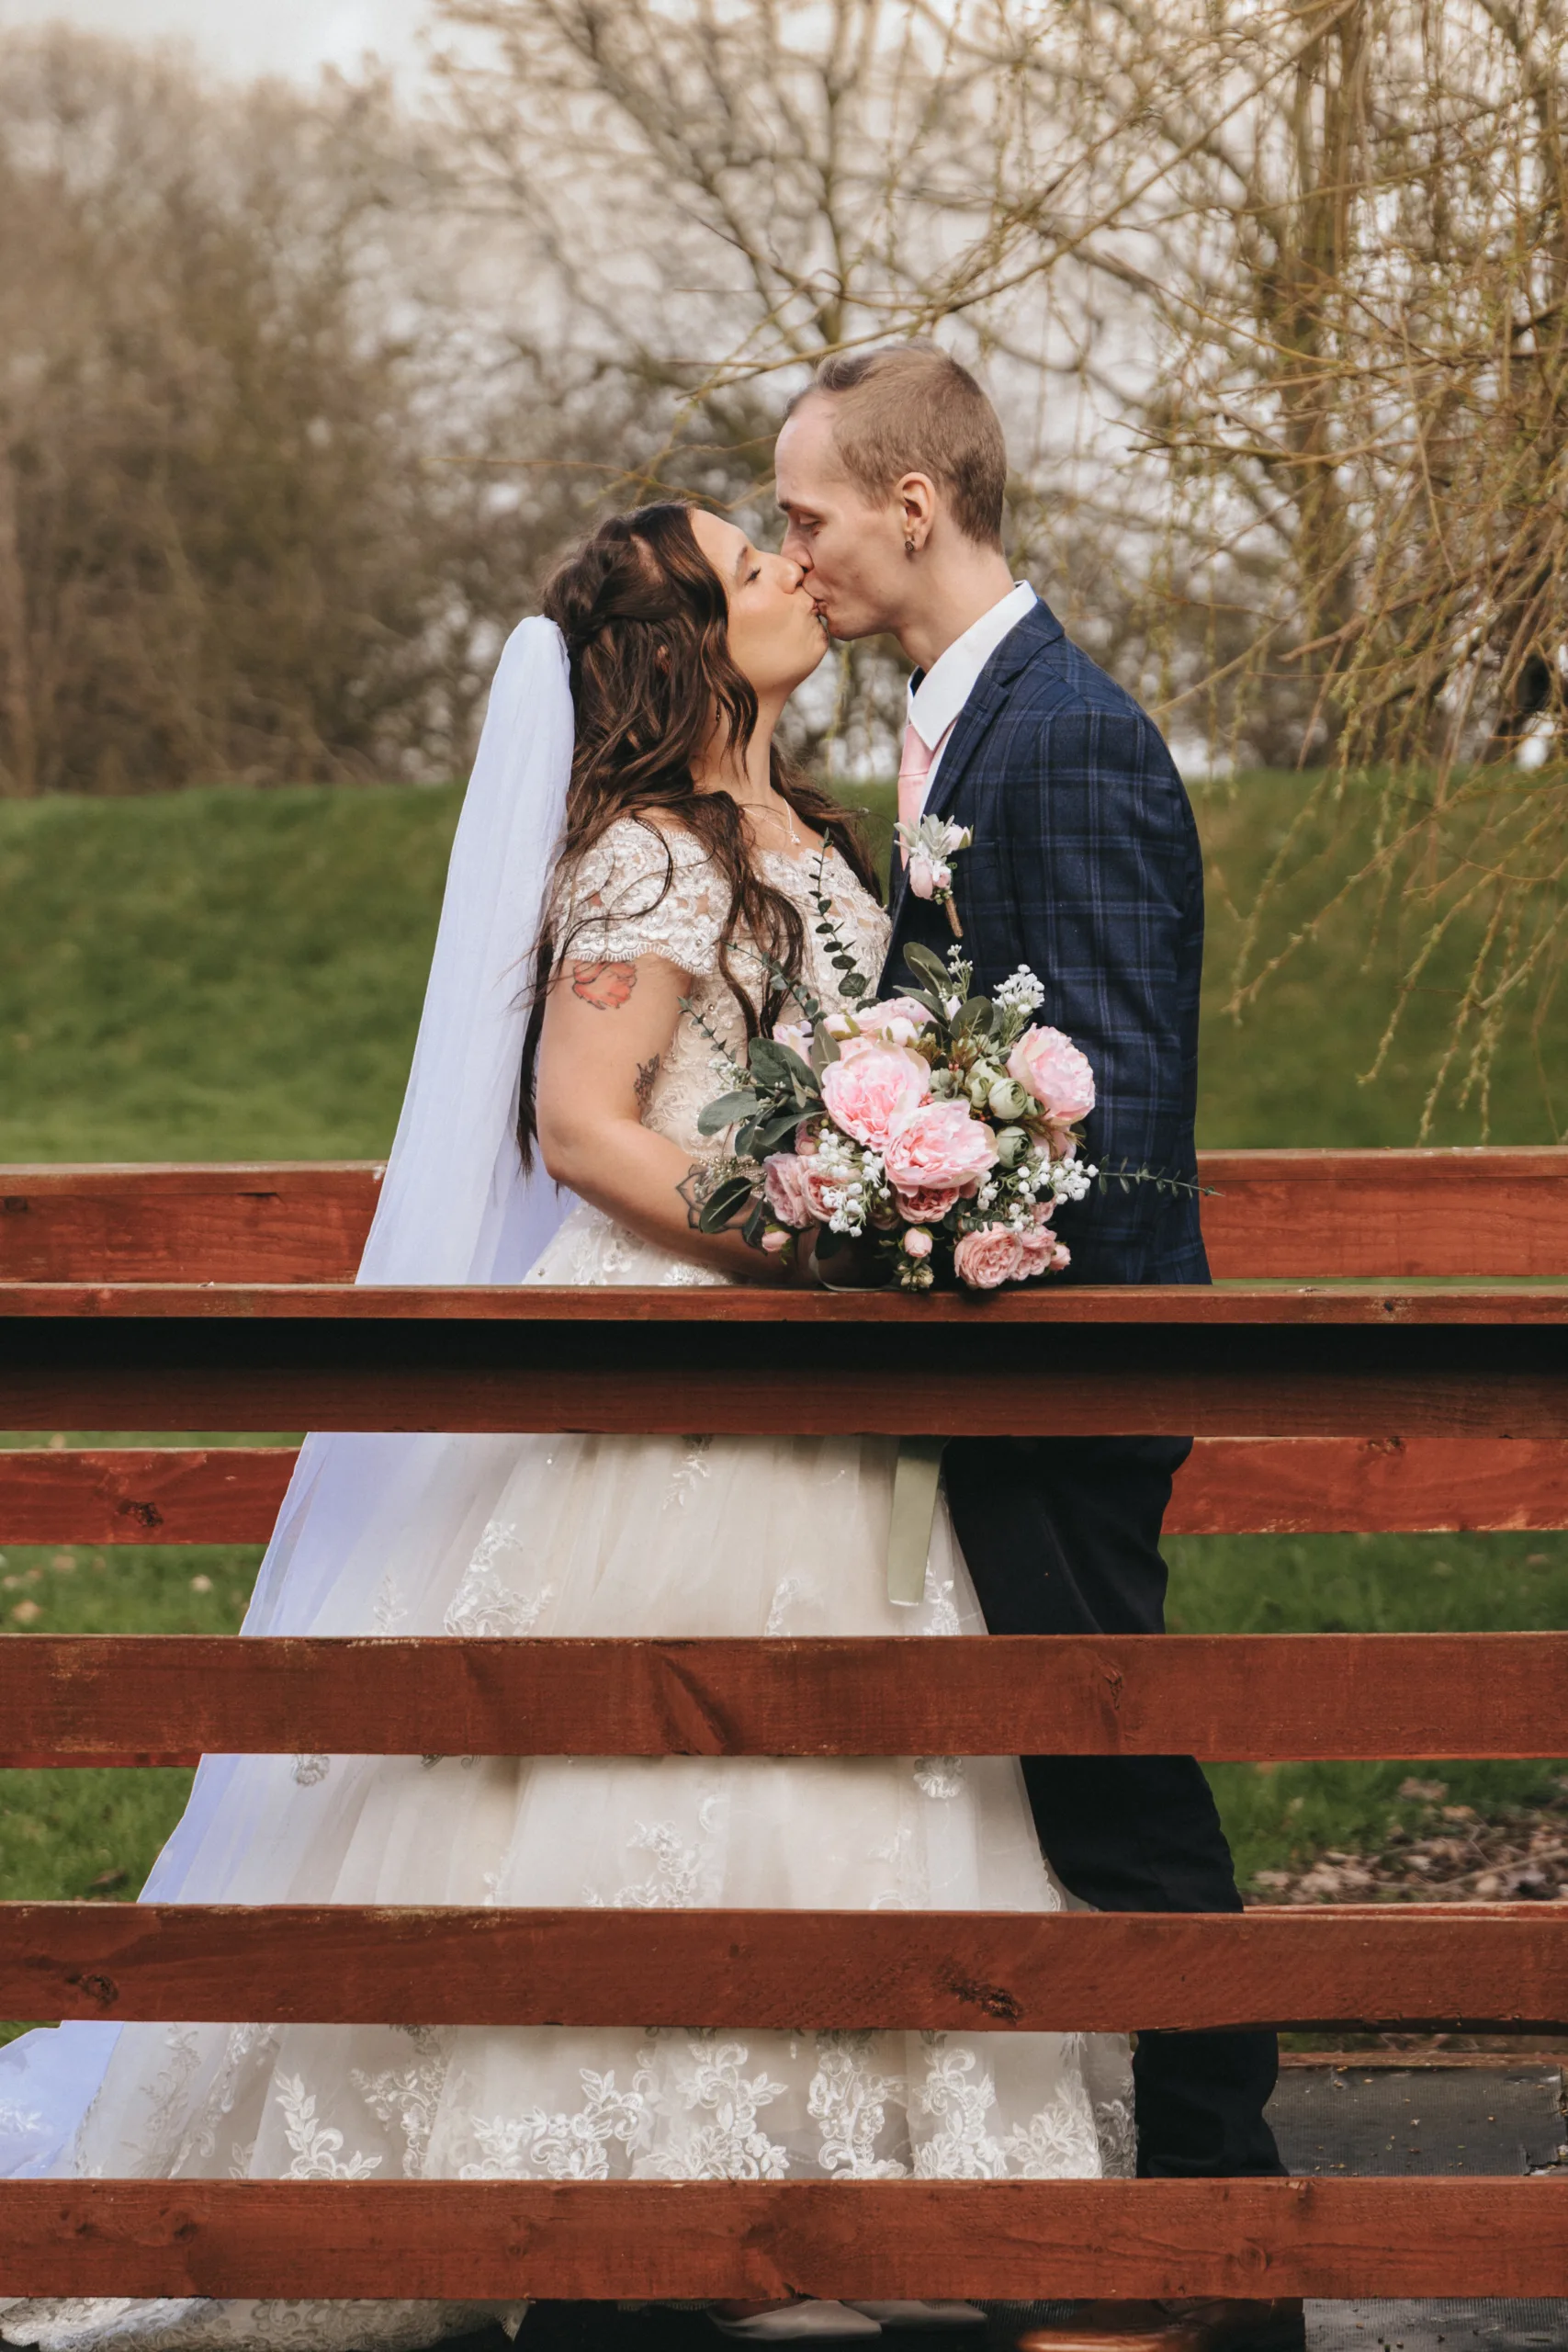 A bride and groom kissing on a wooden bridge.